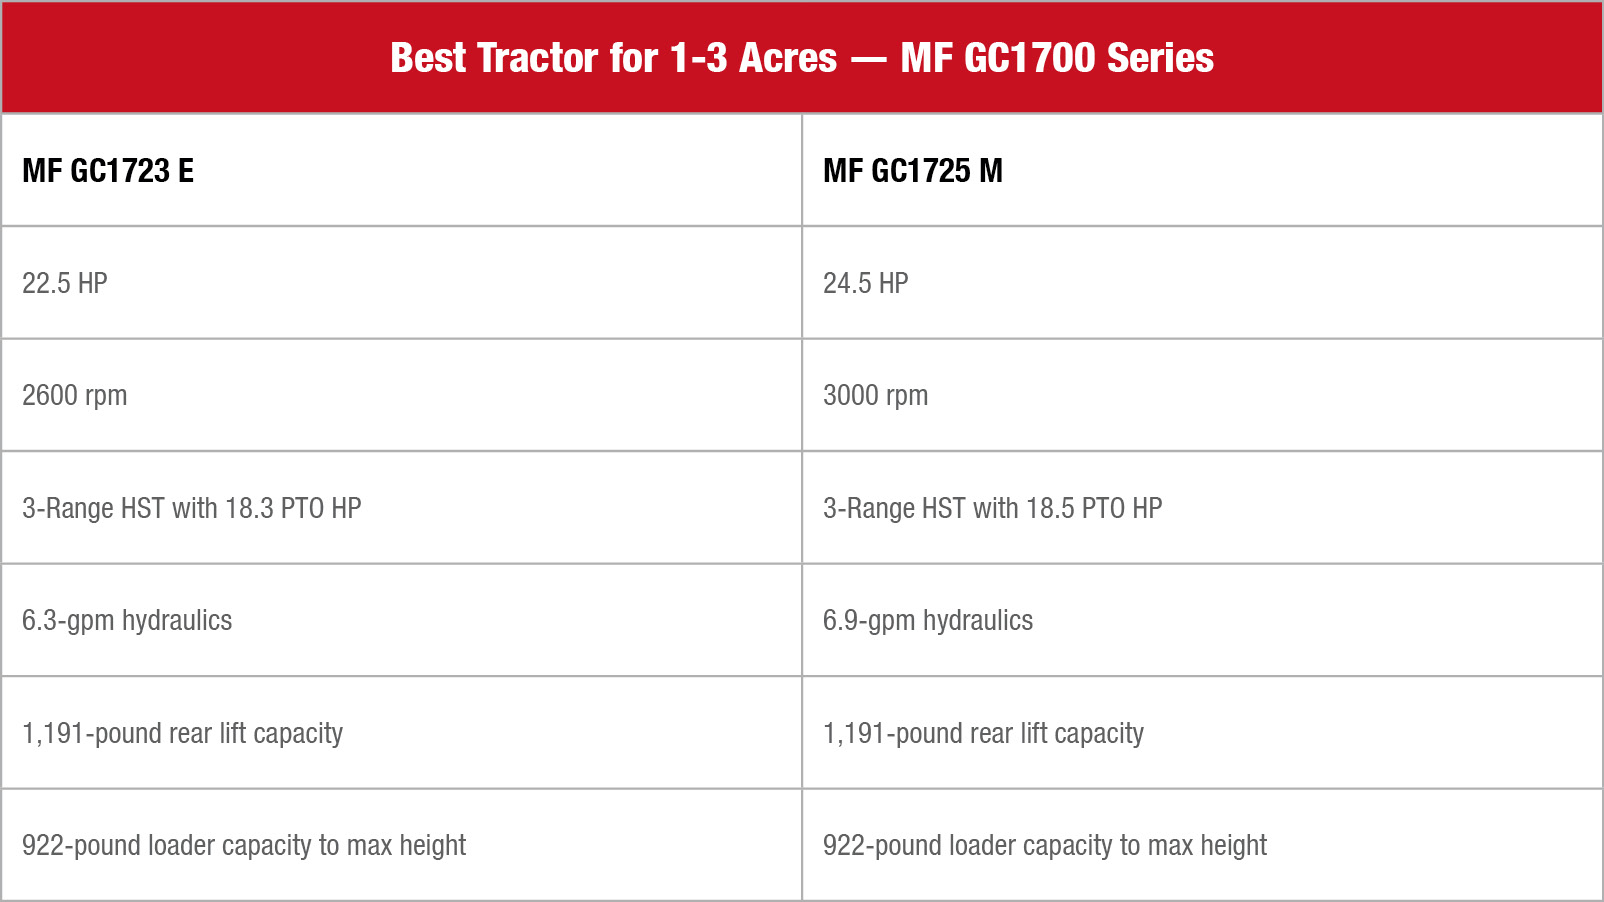 MF GC 1700 Series Specifications